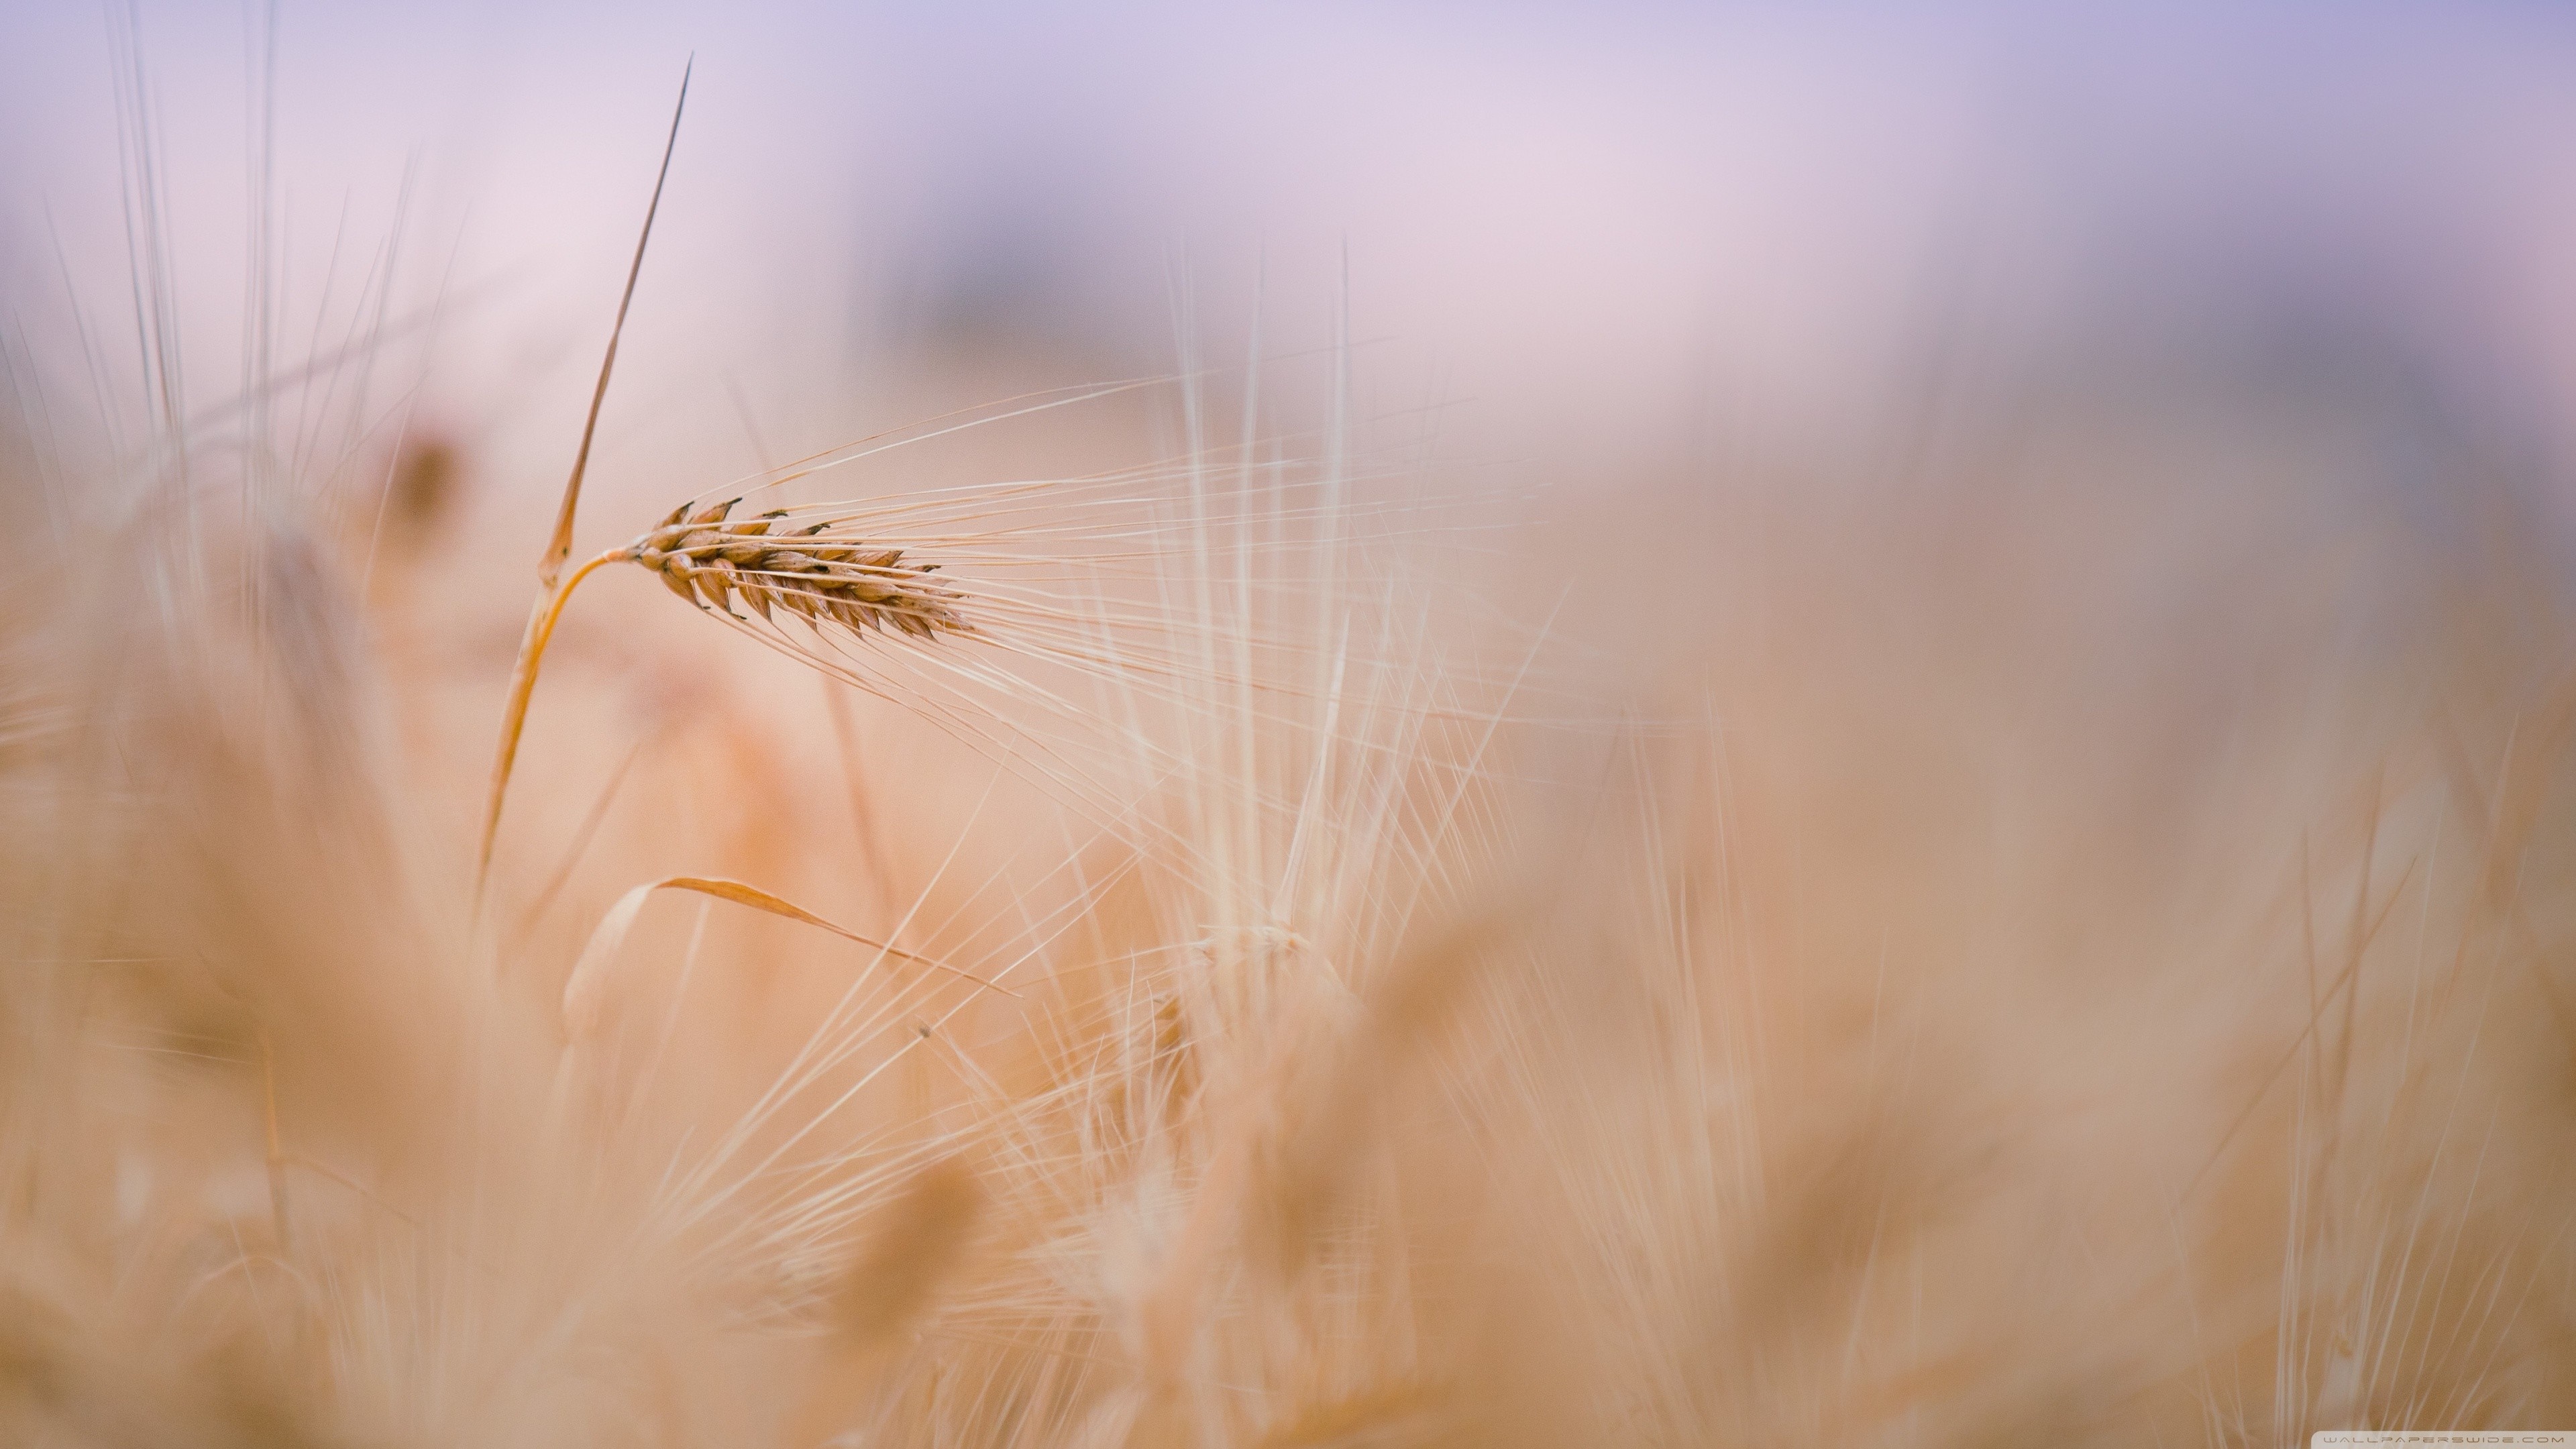 sunlight, food, nature, grass, field, photography, closeup, morning, wheat, autumn, leaf, flower, plant, flowering plant, close up, macro photography, grass family, food grain, commodity HD Wallpaper